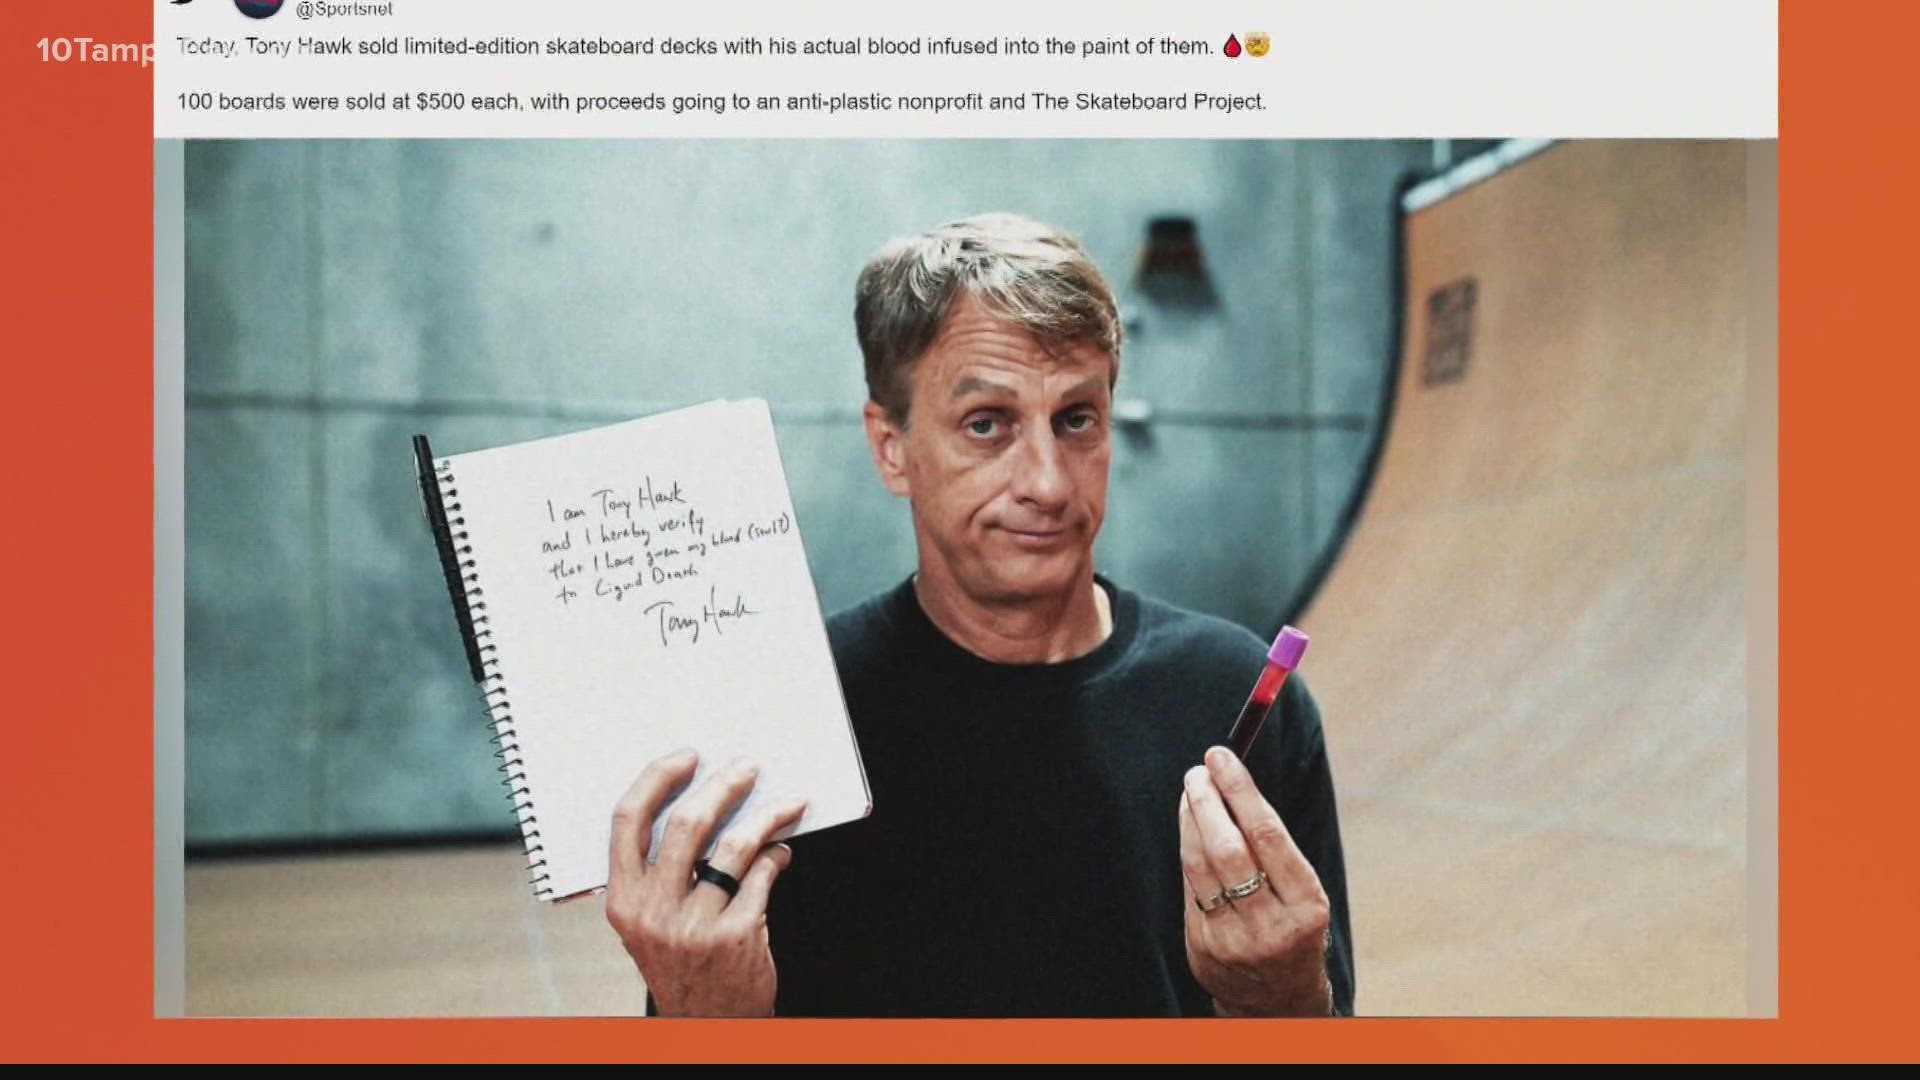 Tony Hawk Is Selling Skateboards Painted With His Own Blood